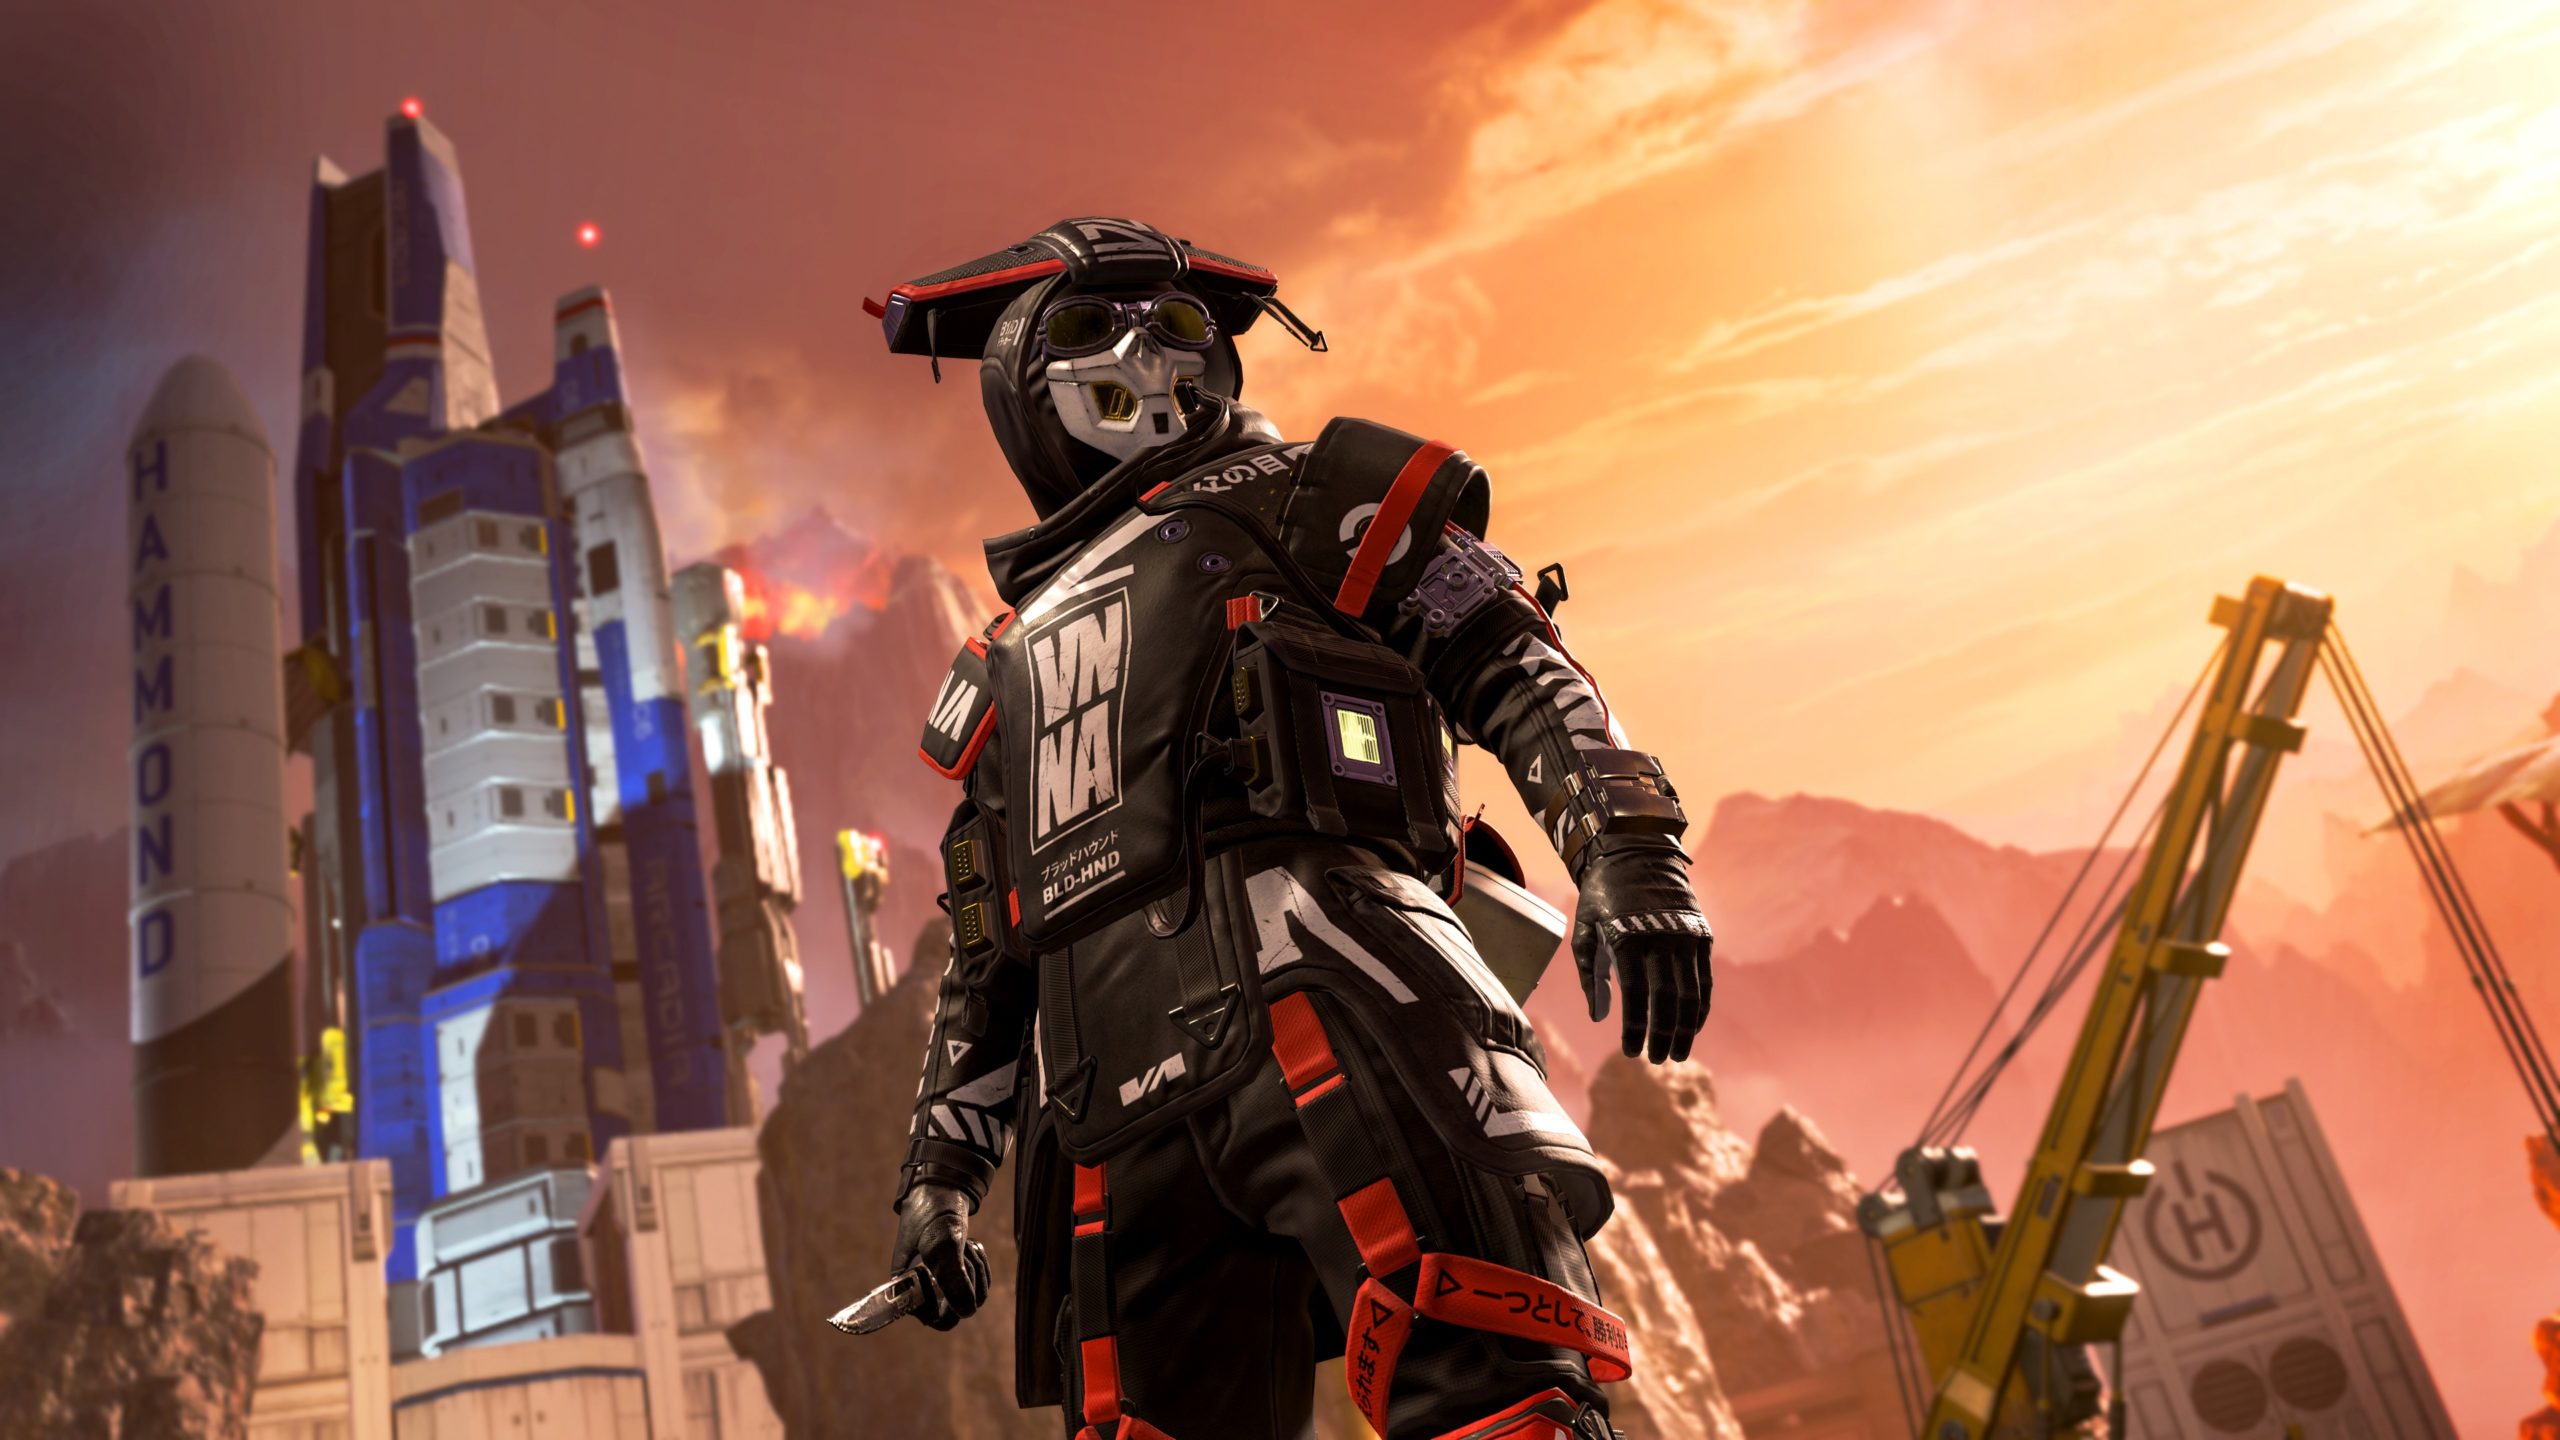 World S Edge Will Return To Apex Legends As First Ranked Map In Legacy Update Dot Esports